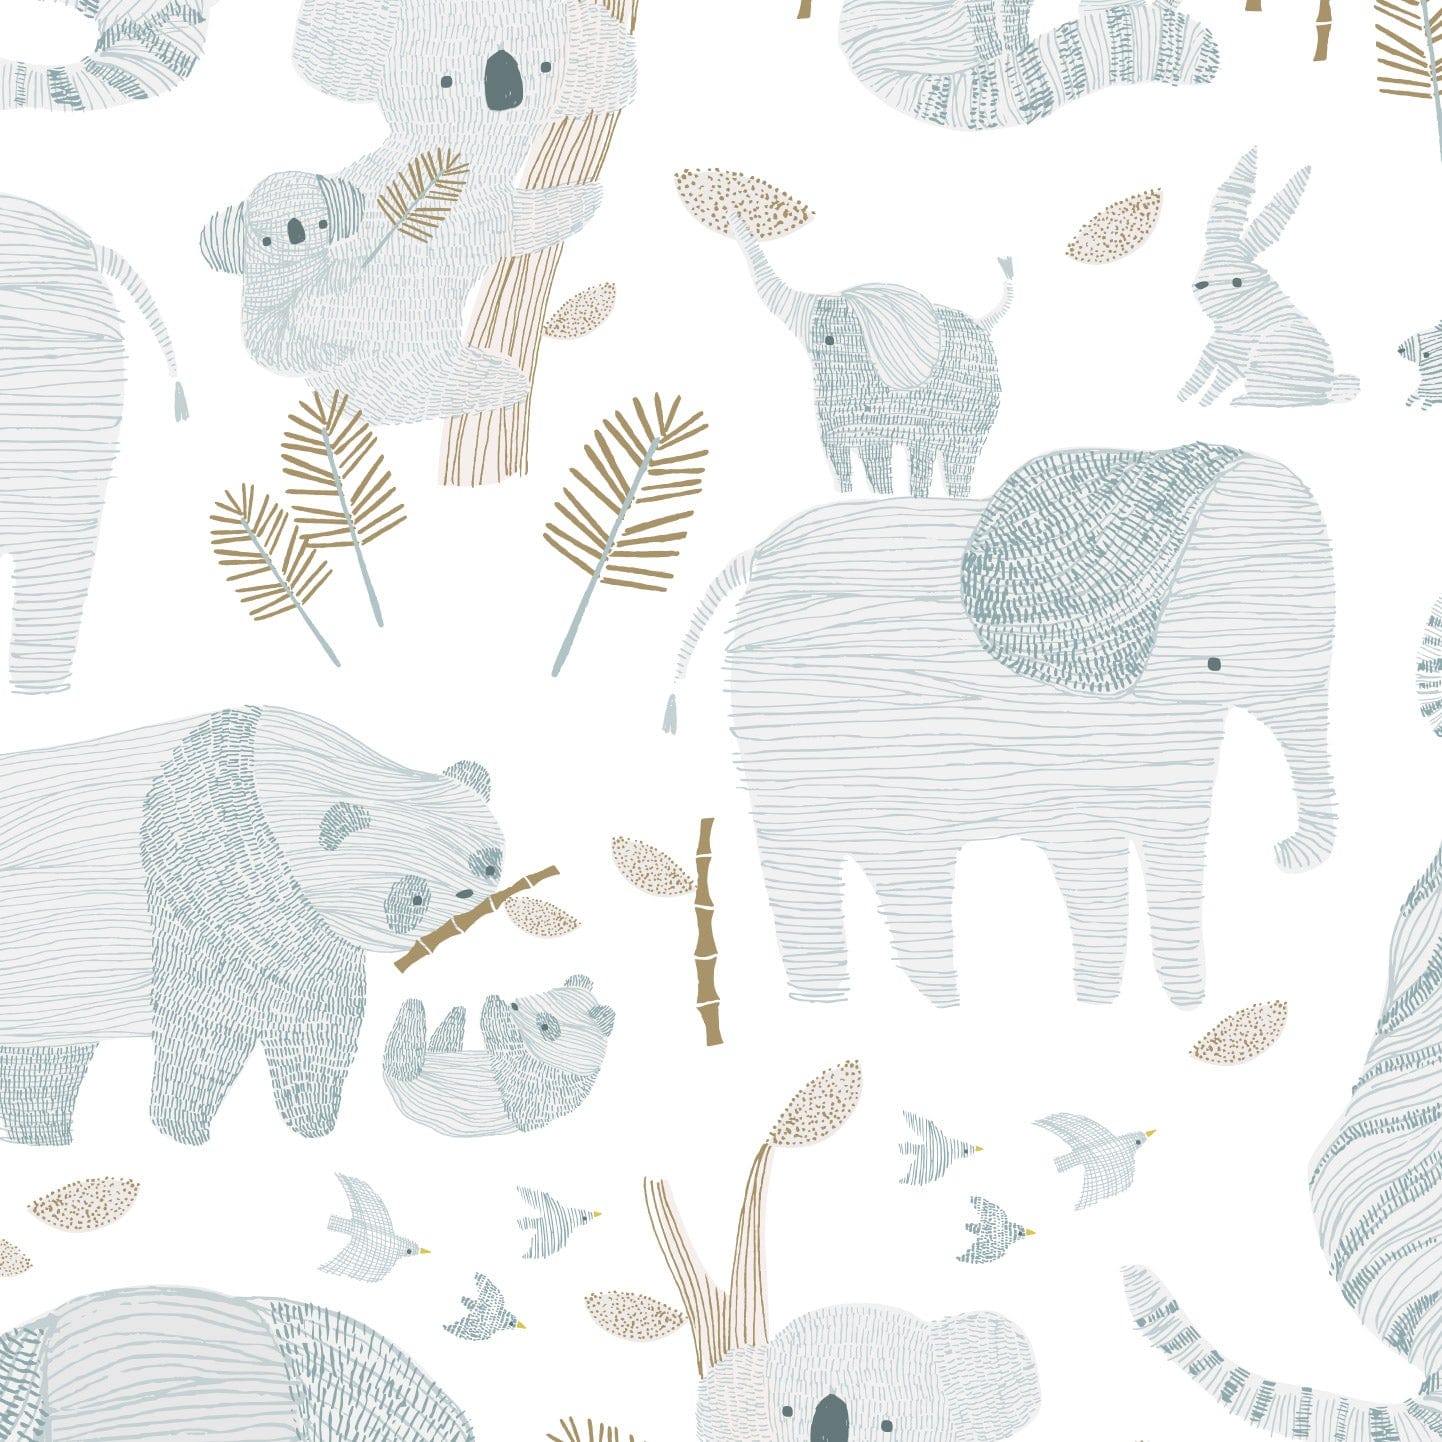 Wallpaper sample of delicate line work animals in blue such as mummy and baby elephants, mummy and baby pandas and mummy and baby koalas with neutral beige detailing. 